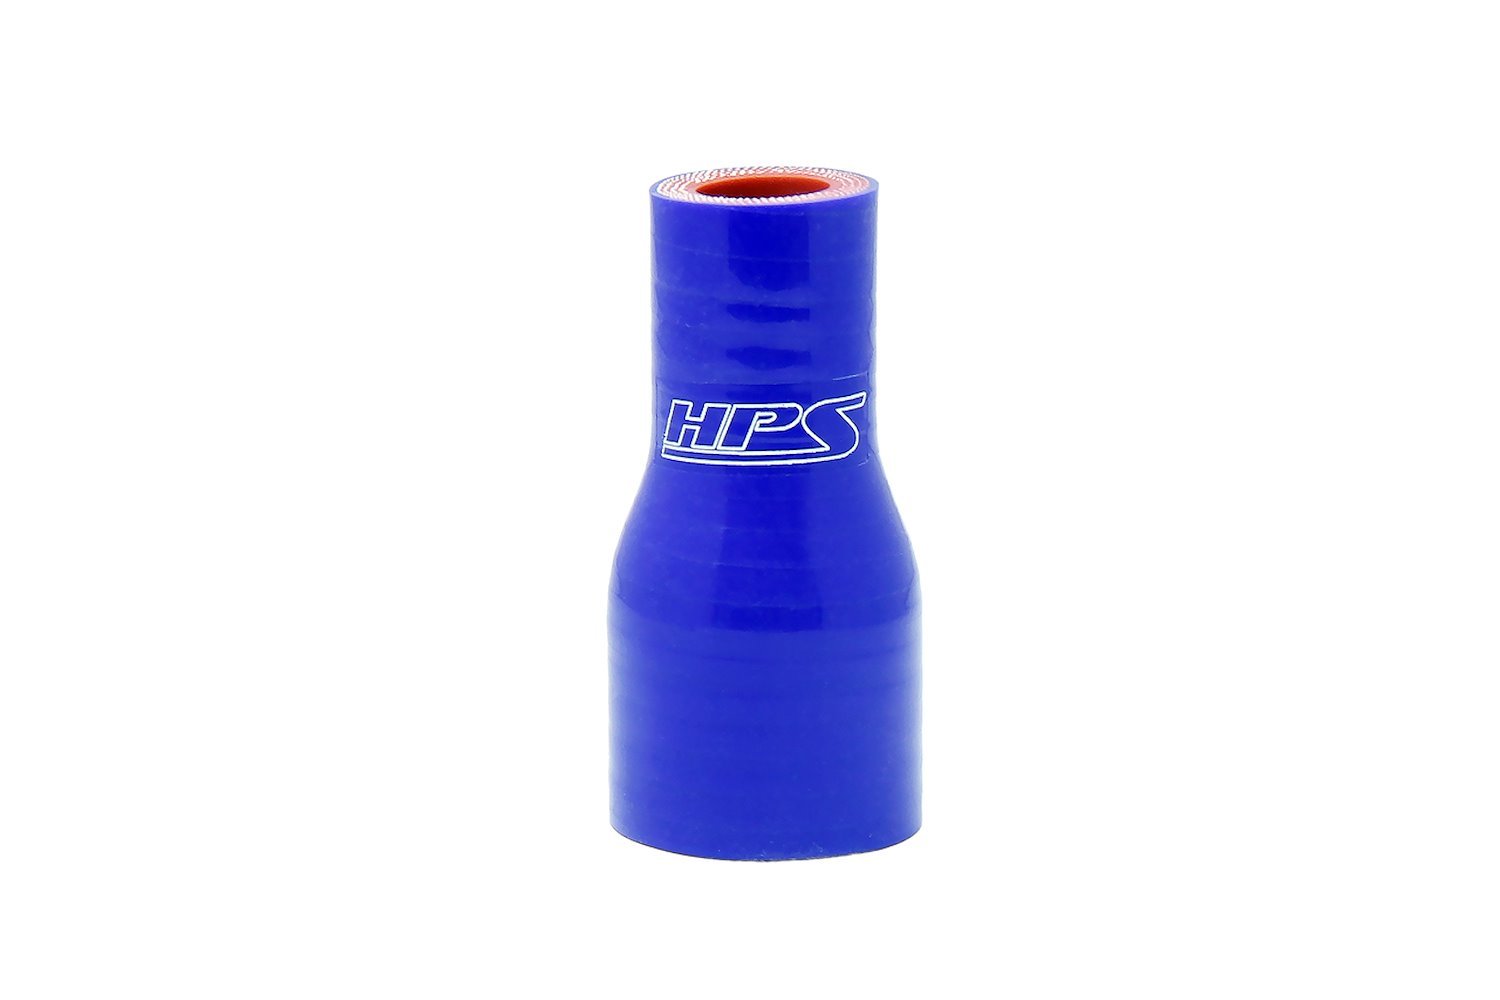 HTSR-100-150-BLUE Silicone Reducer Hose, High-Temp 4-Ply Reinforced, 1 in. - 1-1/2 in. ID, 3 in. Long, Blue